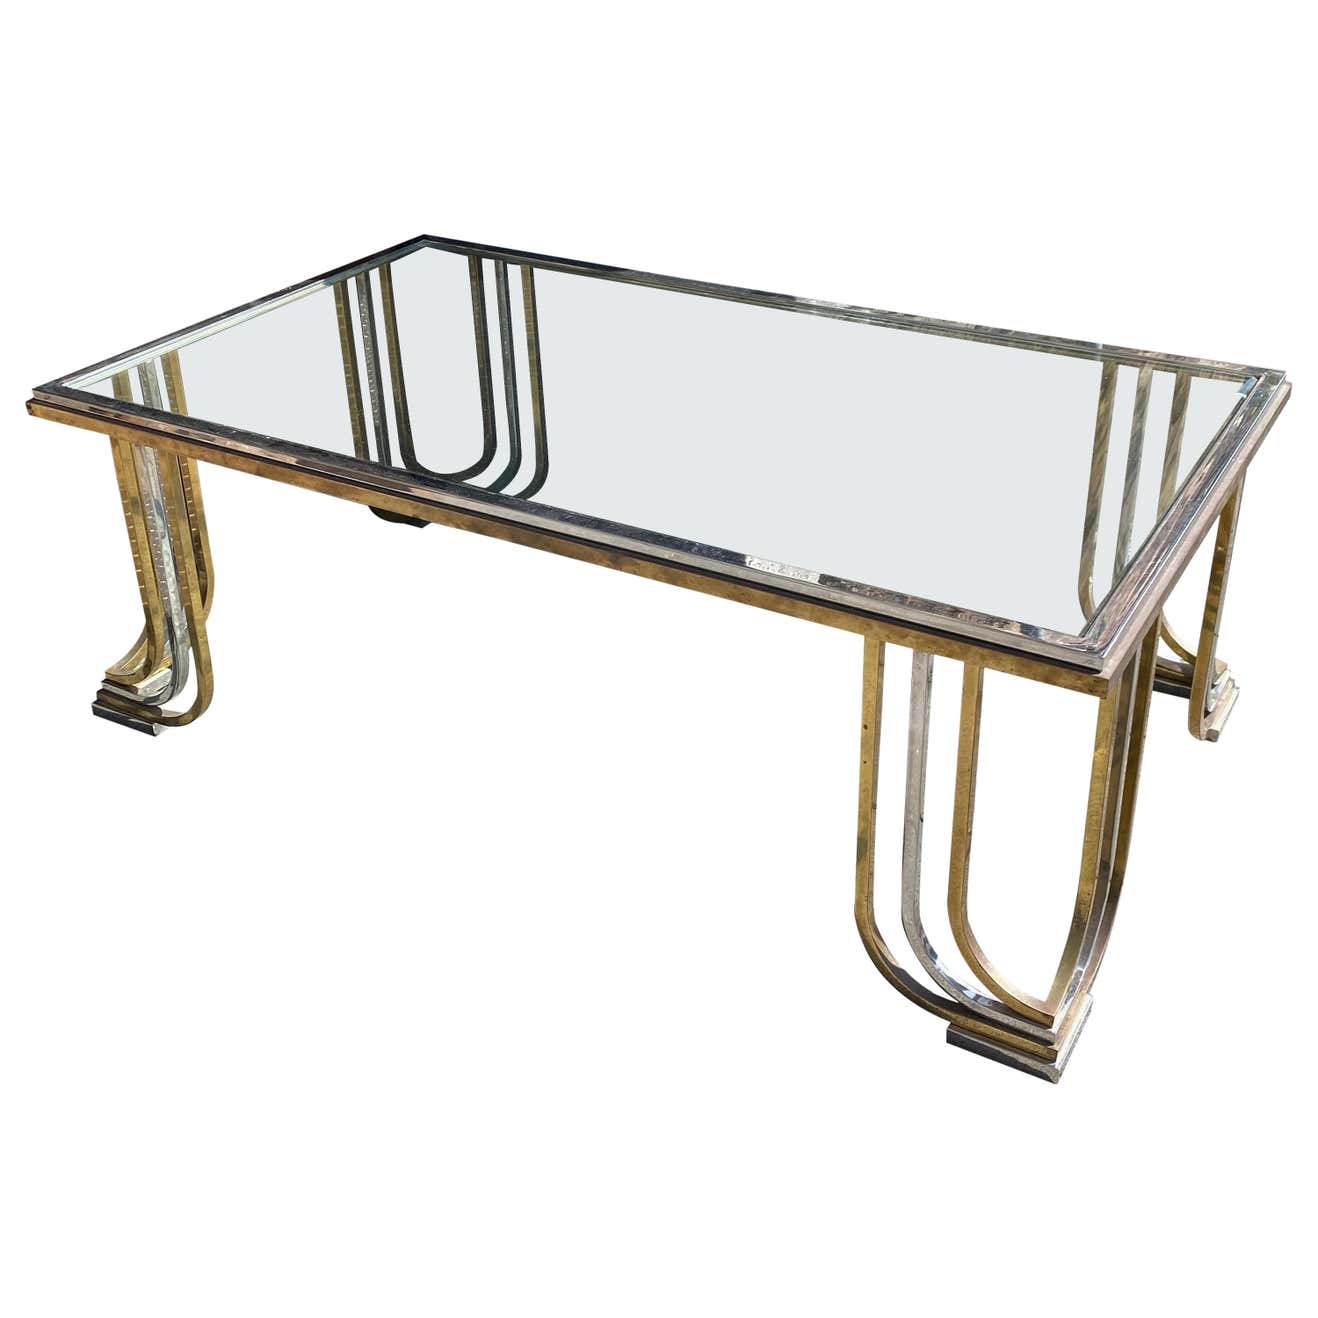 1970s Mid-Century Modern Steel Chromed and Brass Coffee Table by Banci Firenze